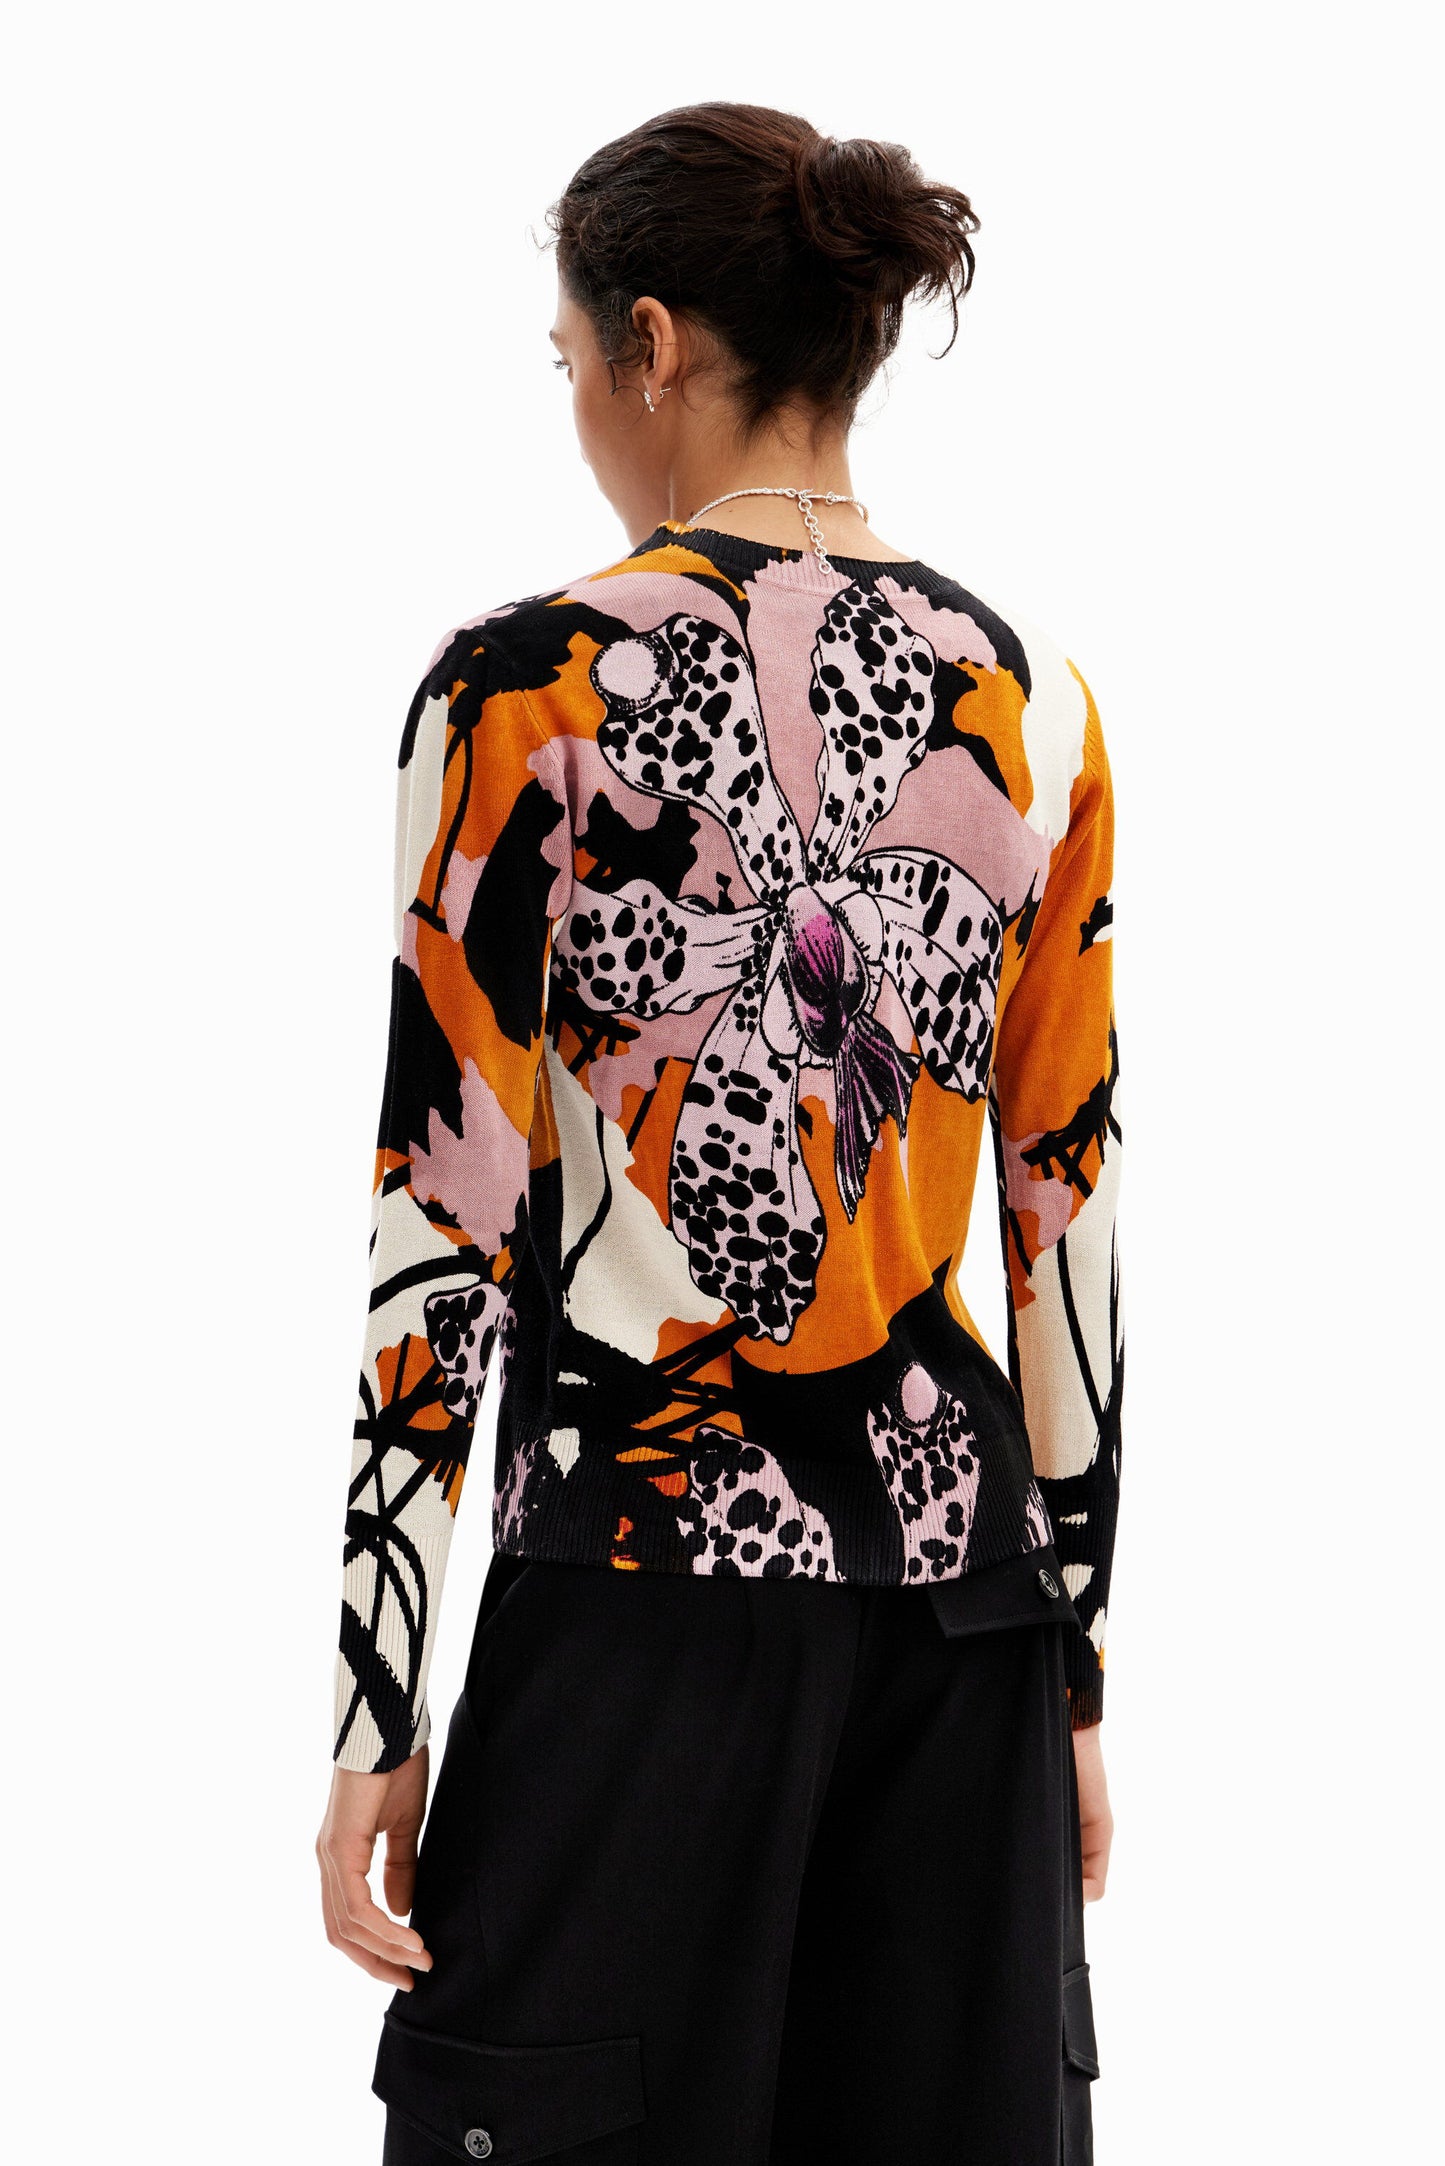 Desigual Pink M. Christian Lacroix Orchid Pullover